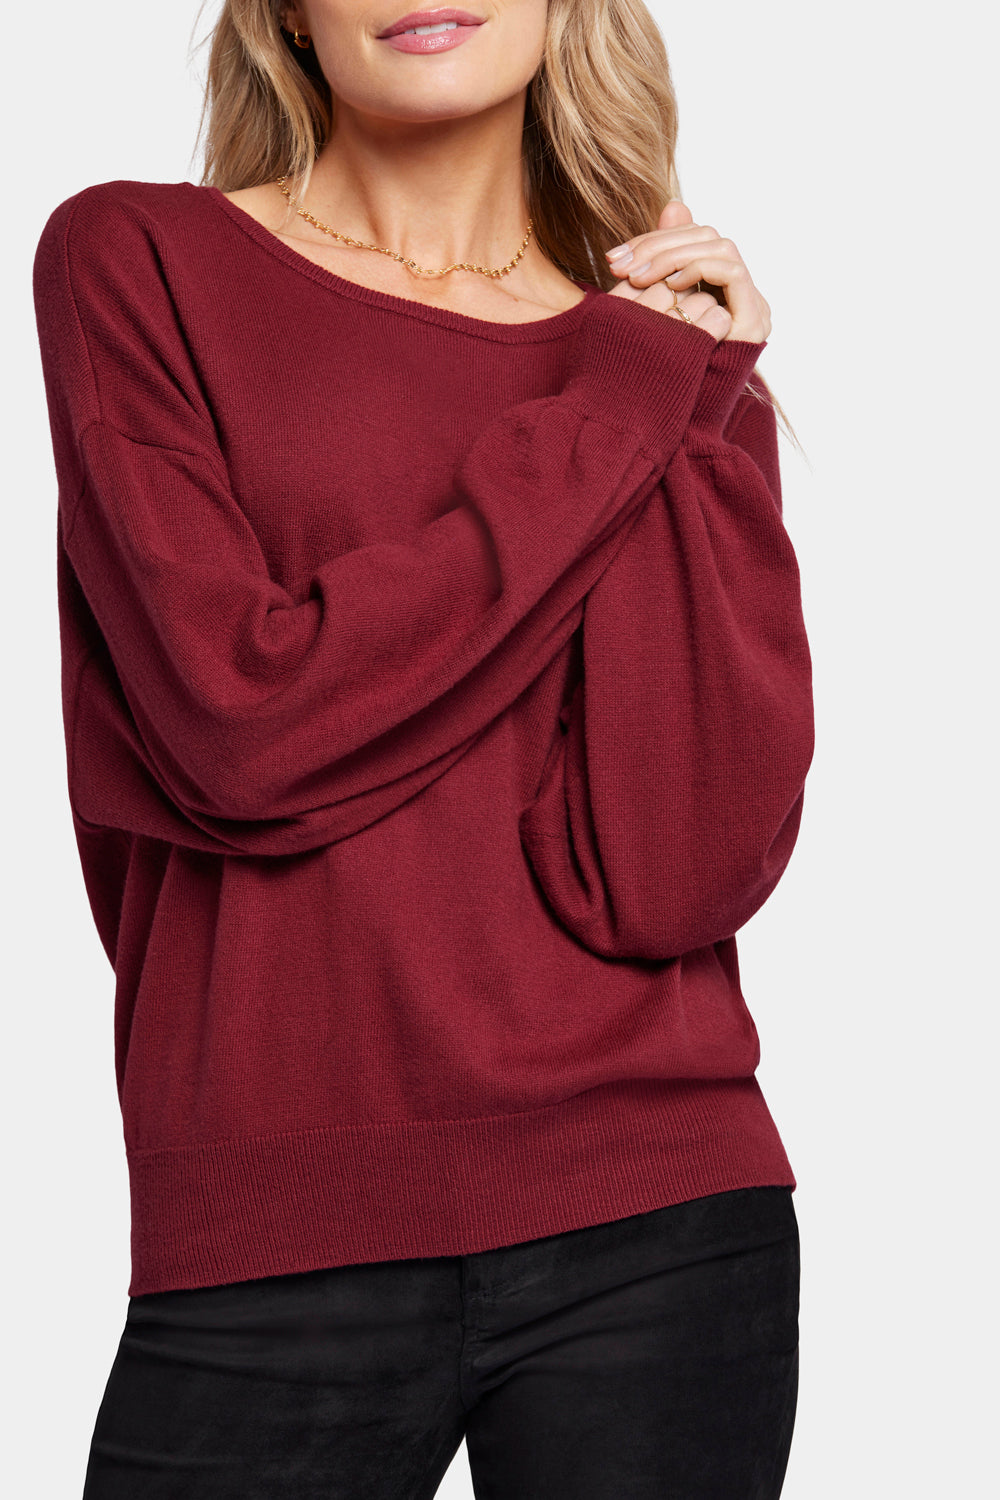 NYDJ Dolman Sleeved Boatneck Sweater With Cashmere - Cranberry Pie